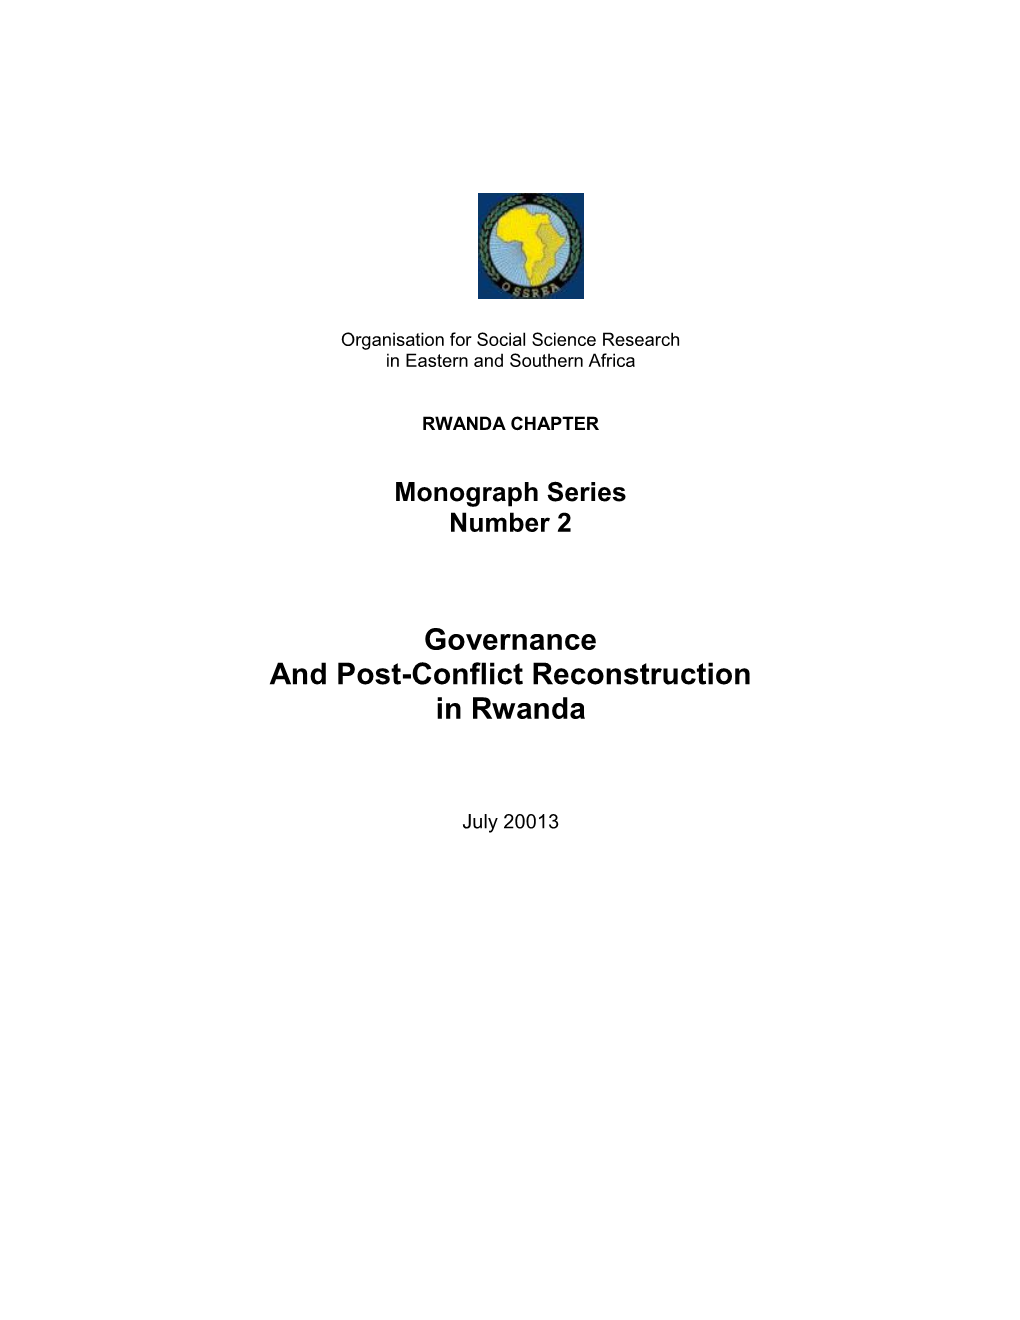 Governance and Post-Conflict Reconstruction in Rwanda